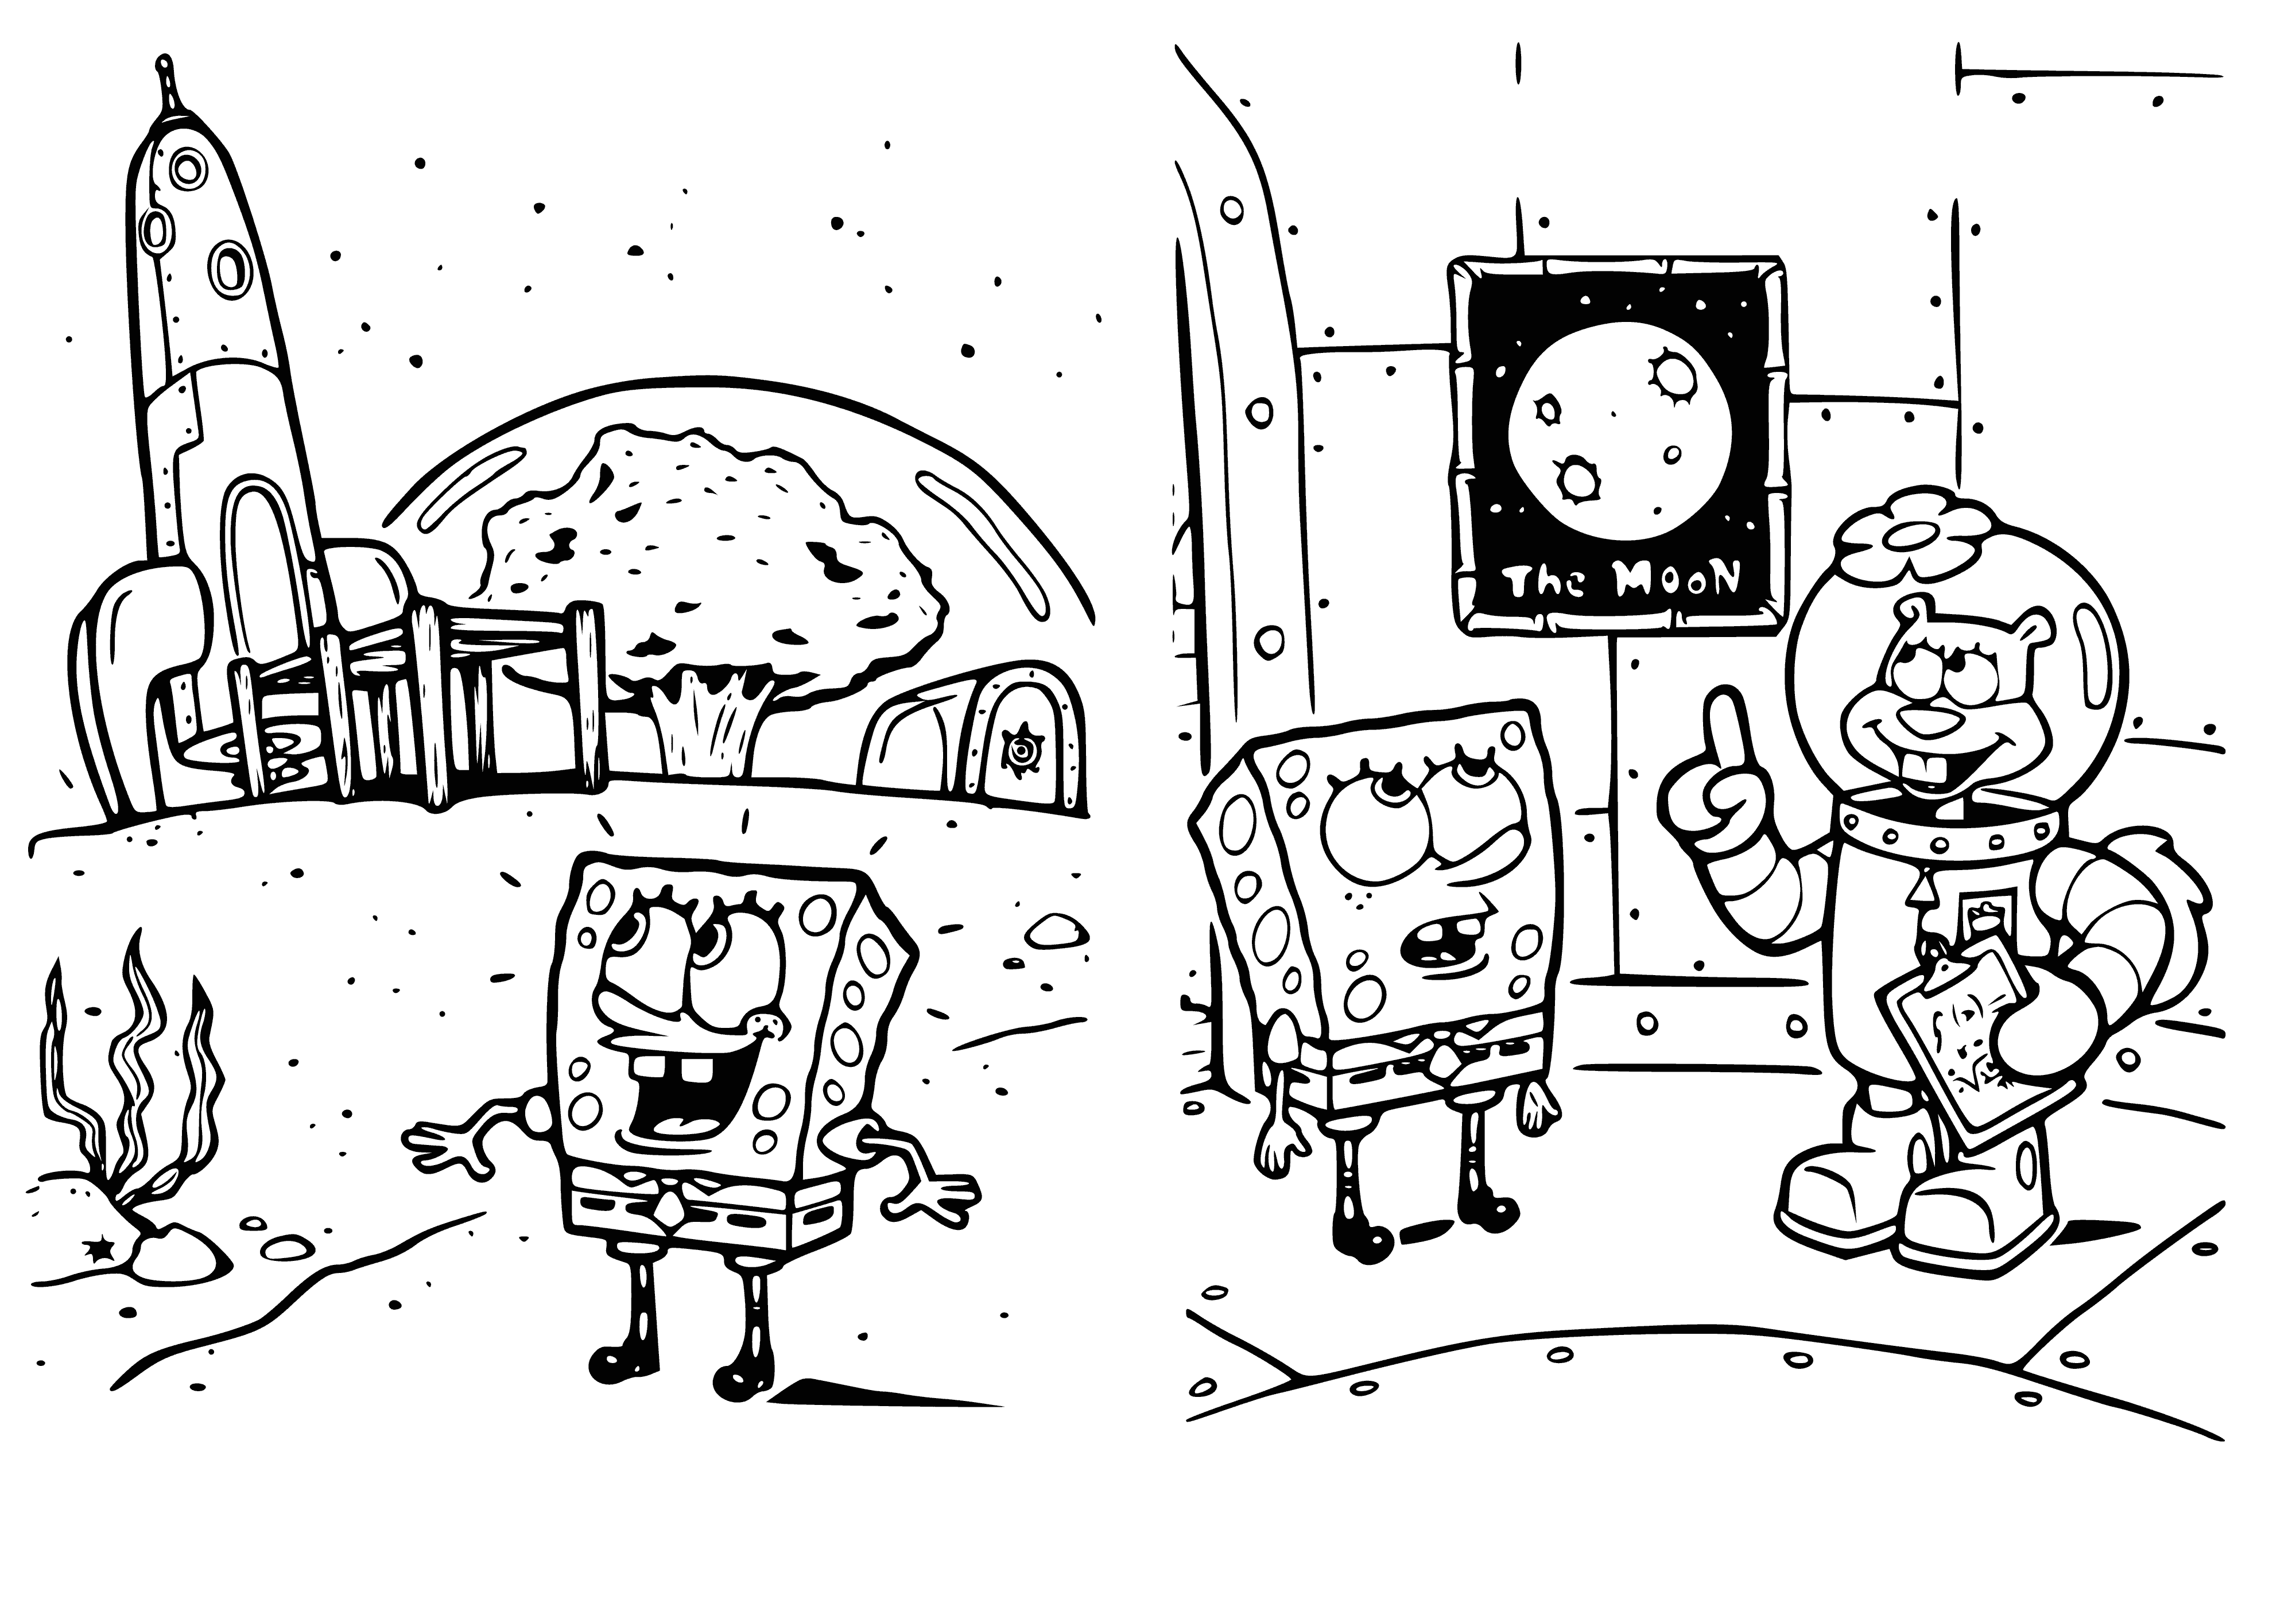 coloring page: Two friends, SpongeBob & a squirrel, stand together in a coloring page. SpongeBob is light yellow & wearing red/white shorts. Squirrel is brown w/white belly, small black eyes & a bushy tail.